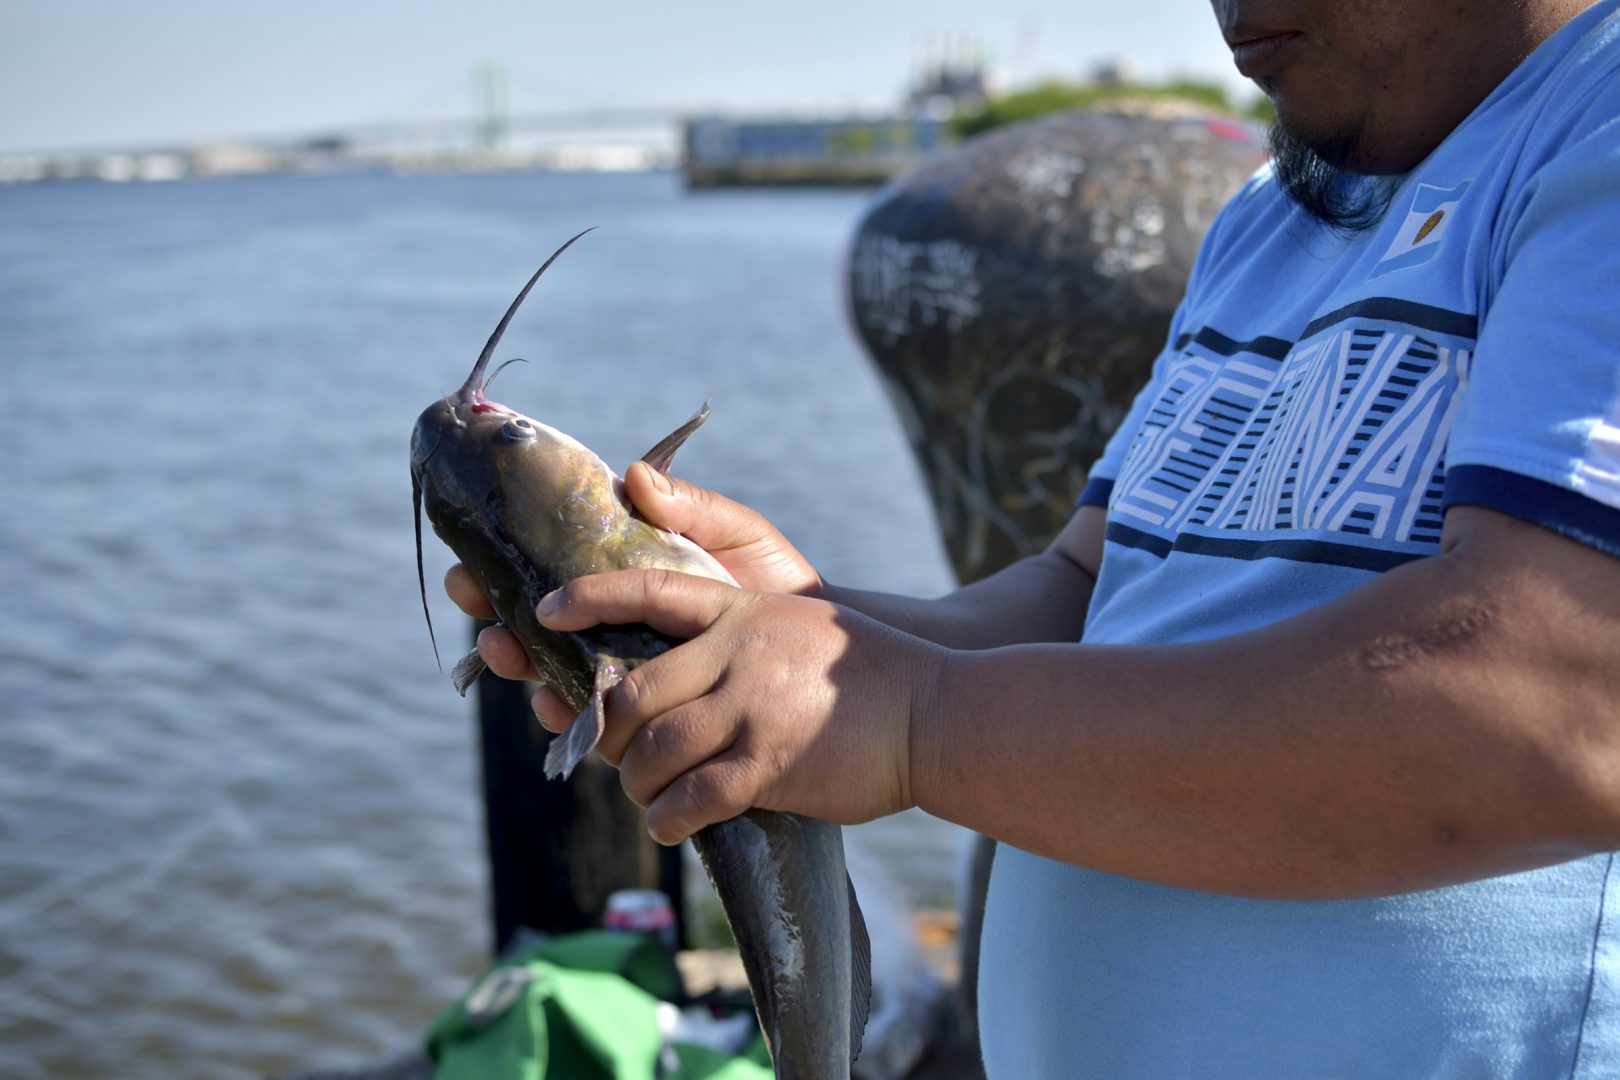 Fishermen share a caught catfish at Pier 60 on the Delaware waterfront, near Tasker Street, in South Philadelphia, PA, on May 12, 2018. (Bastiaan Slabbers/for WHYY)